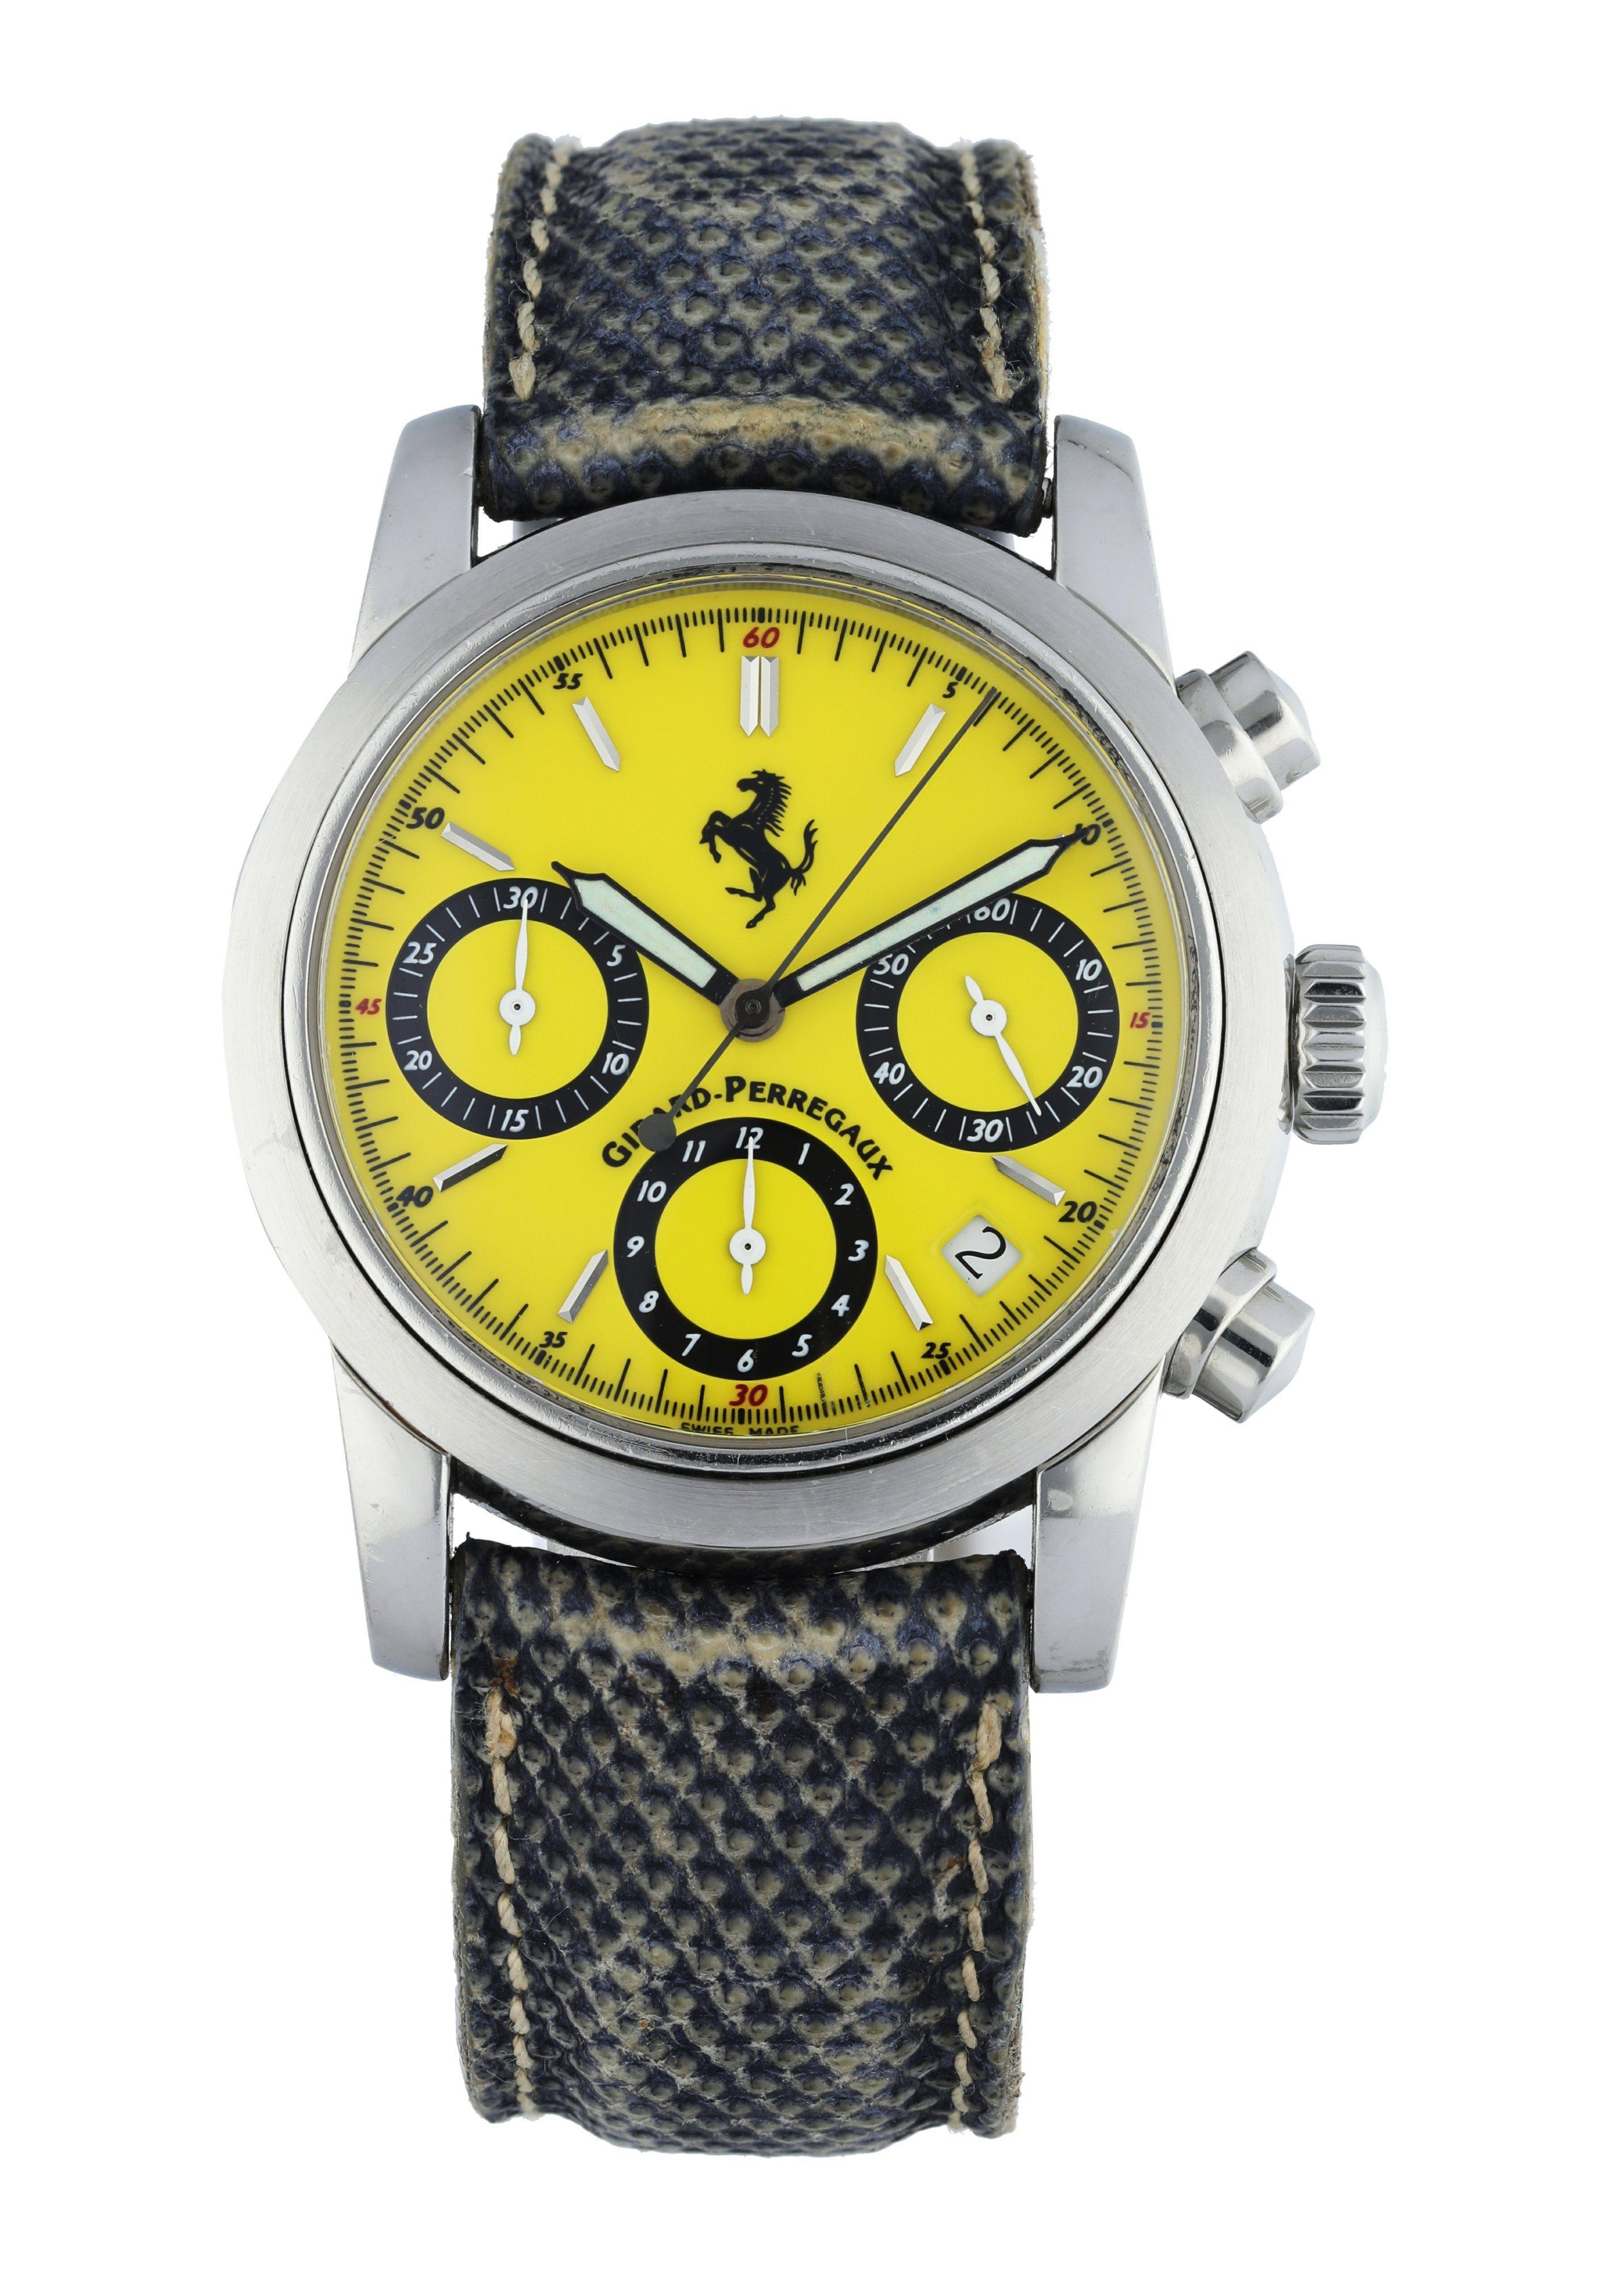 Girard Perregaux Ferrari 8020 Men's Watch.
38mm Stainless Steel case. 
Stainless Steel smooth bezel. 
Yellow dial with Steel hands and index hour markers. 
Minute markers on the outer dial. 
Date display between the 4 & 5 o'clock position. 
Leather